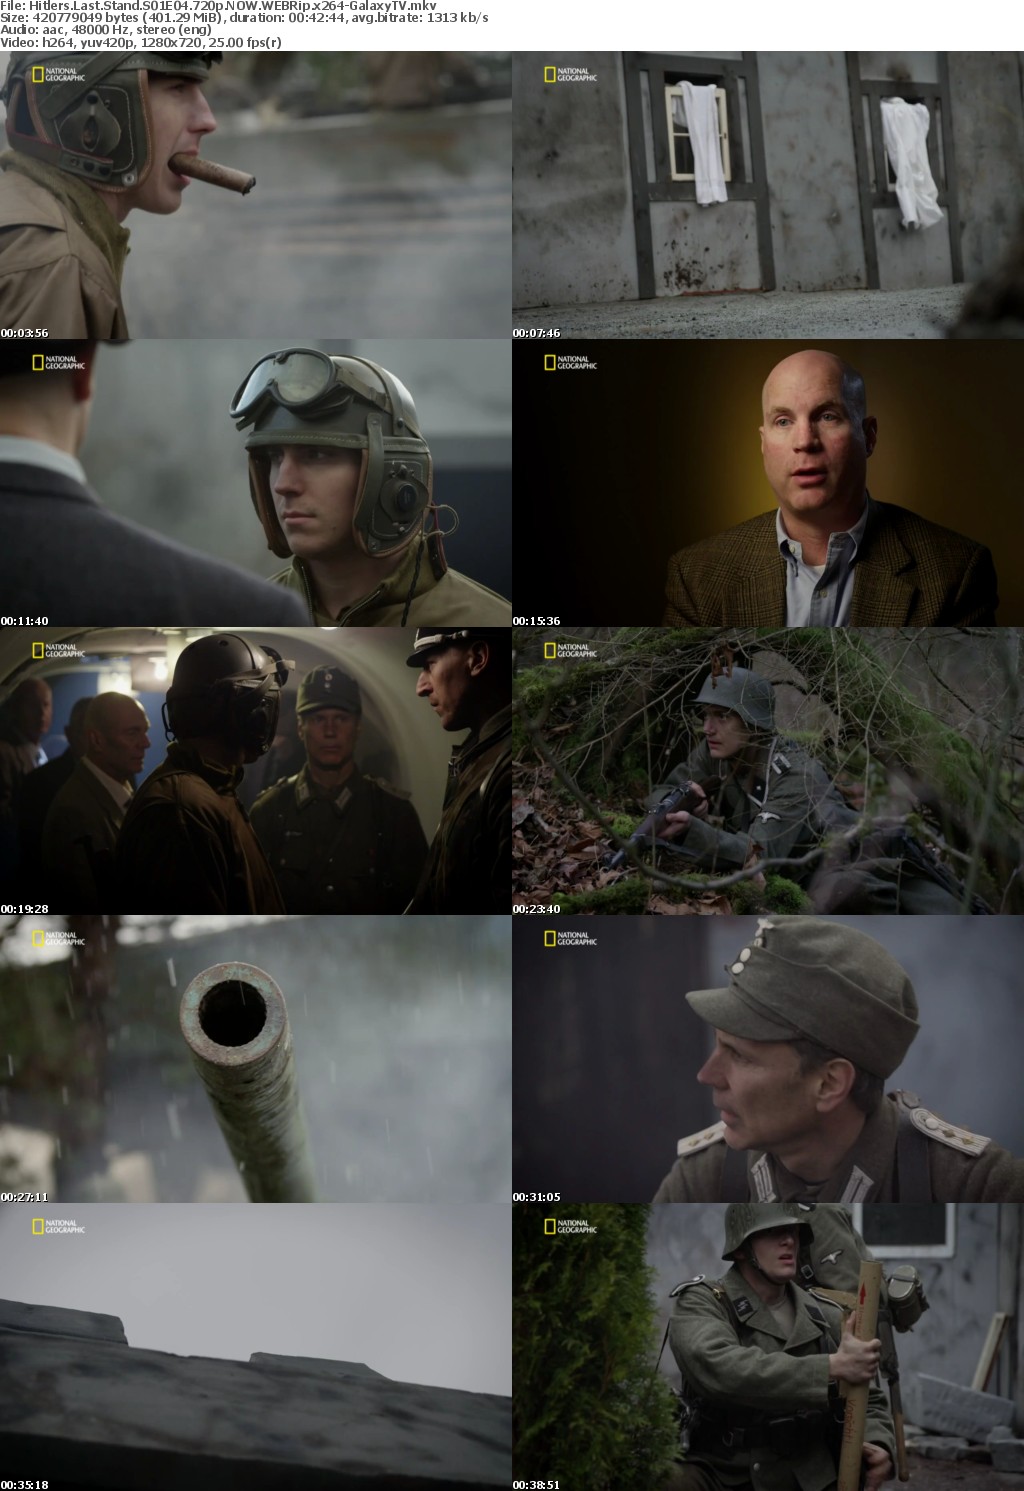 Hitlers Last Stand S01 COMPLETE 720p NOW WEBRip x264-GalaxyTV